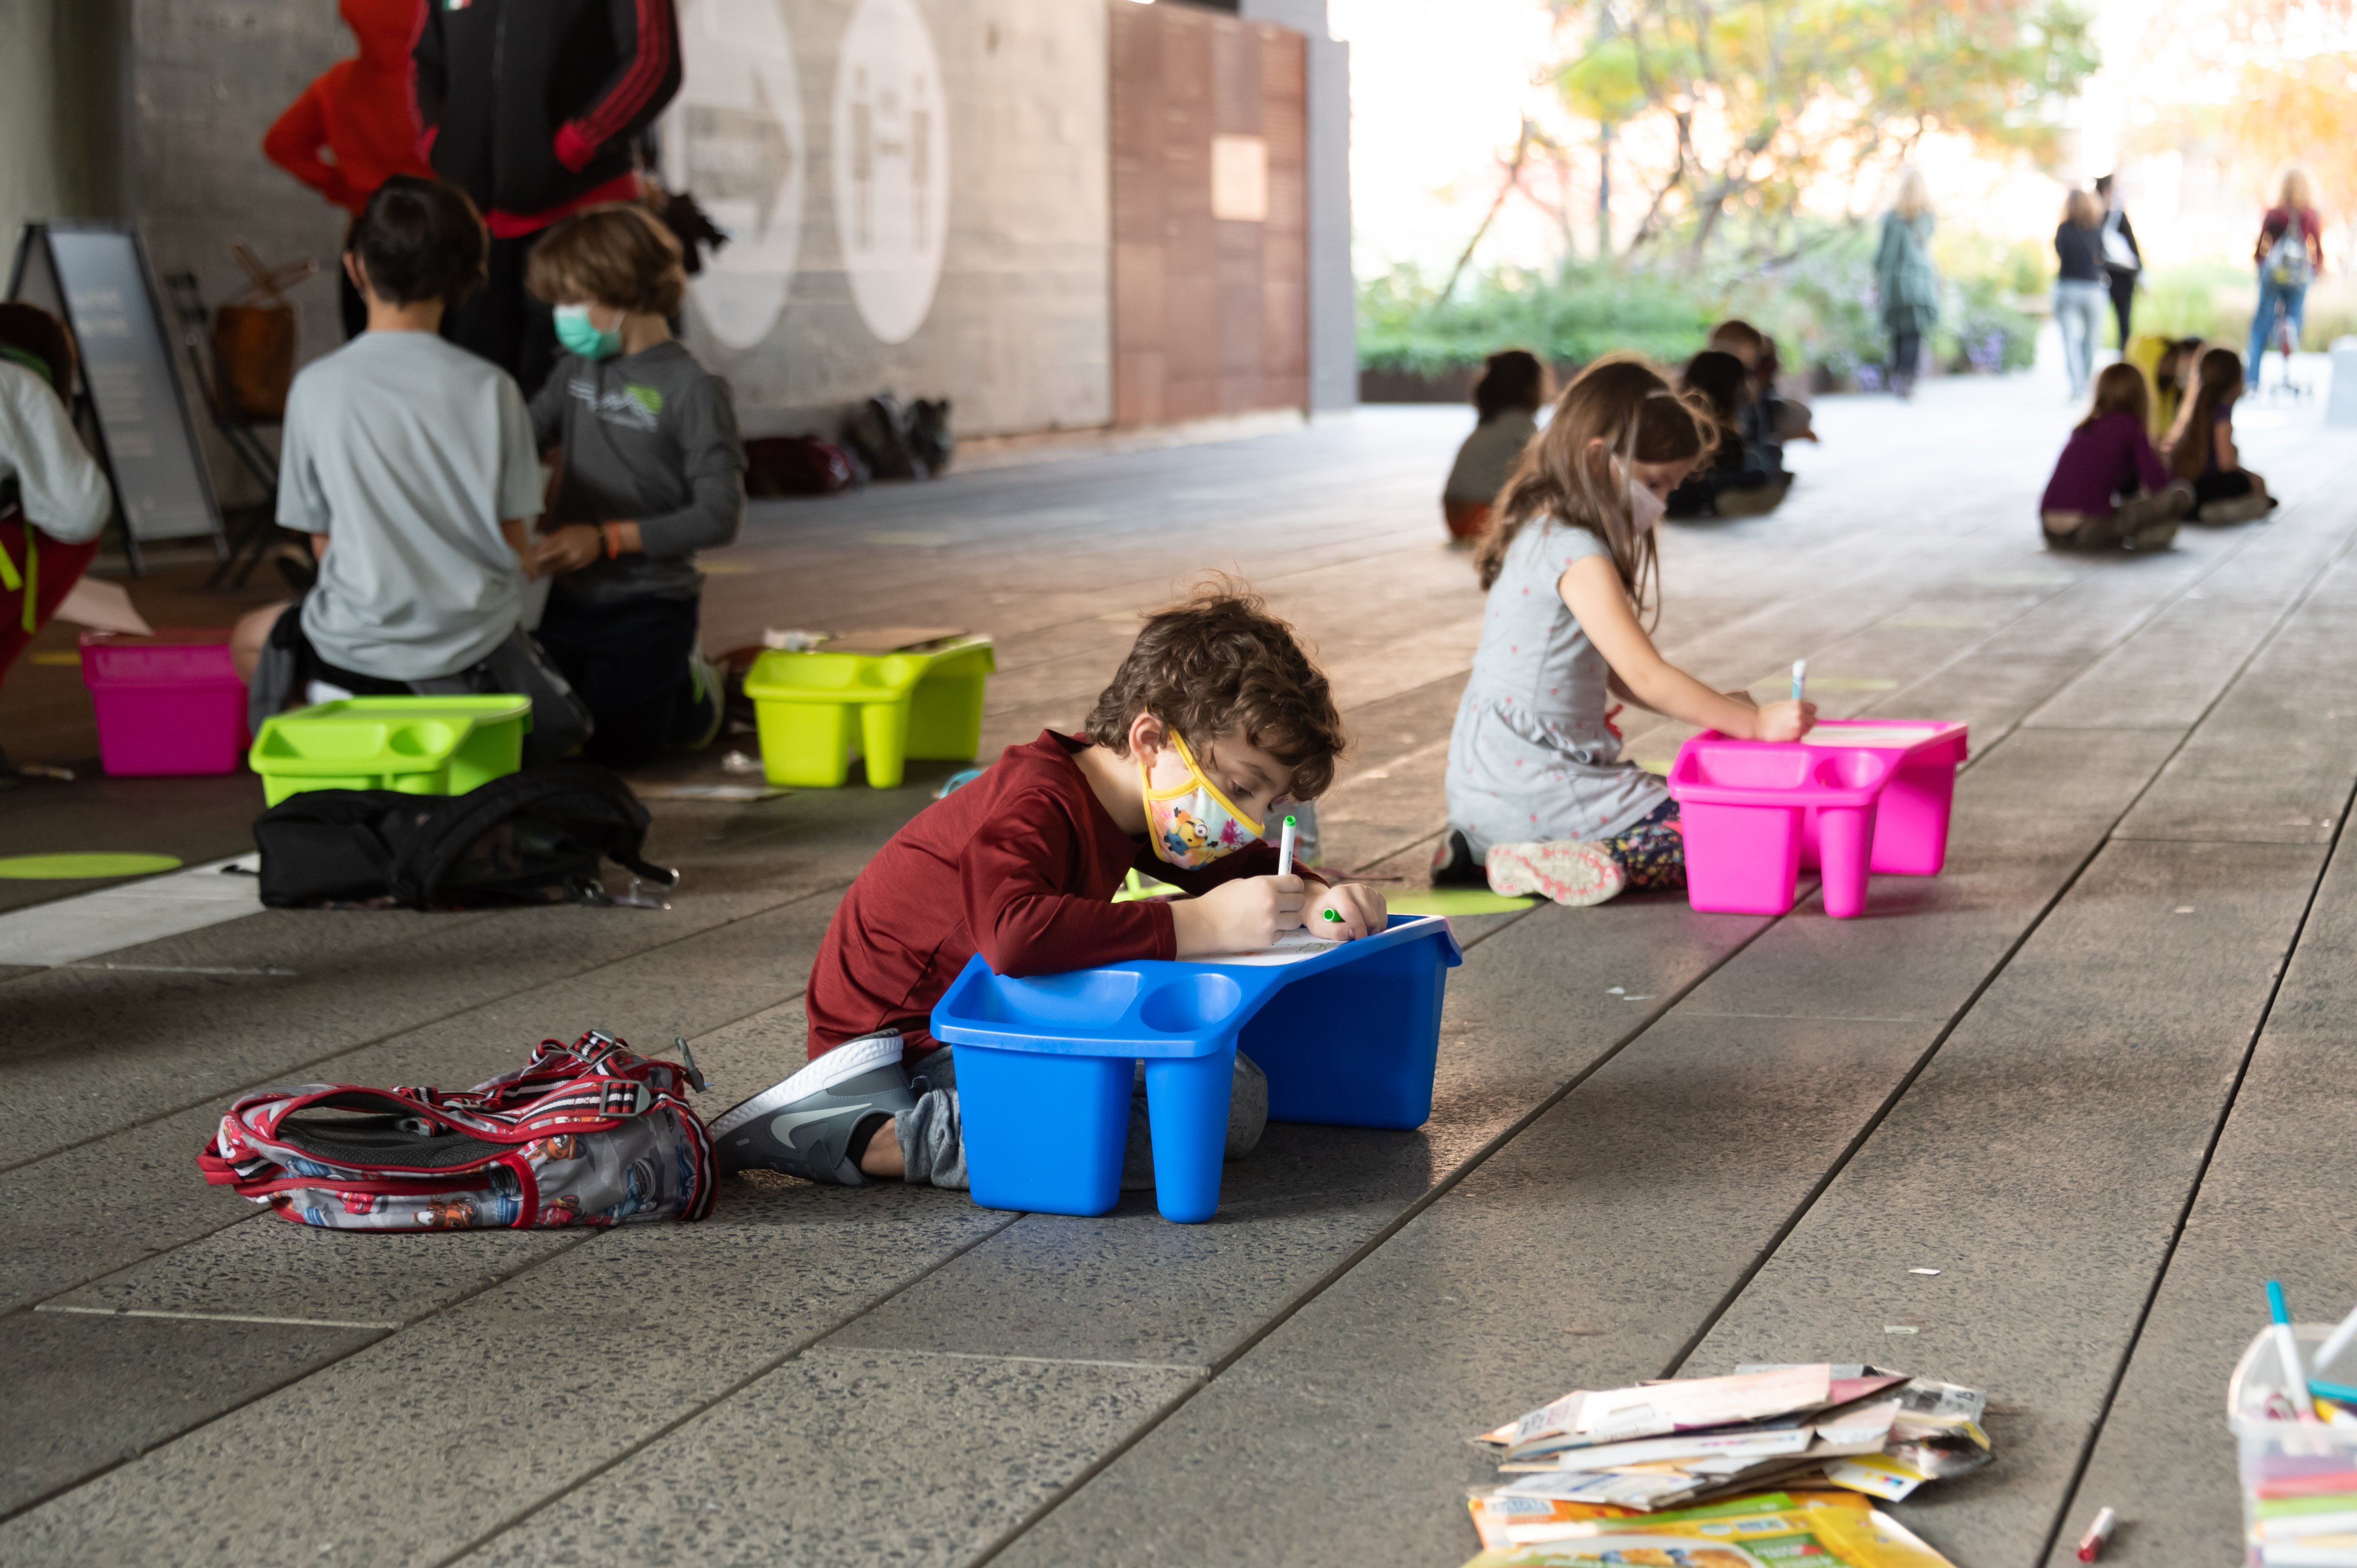 Students from PS 11 in New York City do their lessons outdoors, at the city's High Line park, on Oct. 21, 2020. (Noam Galai—Getty Images)